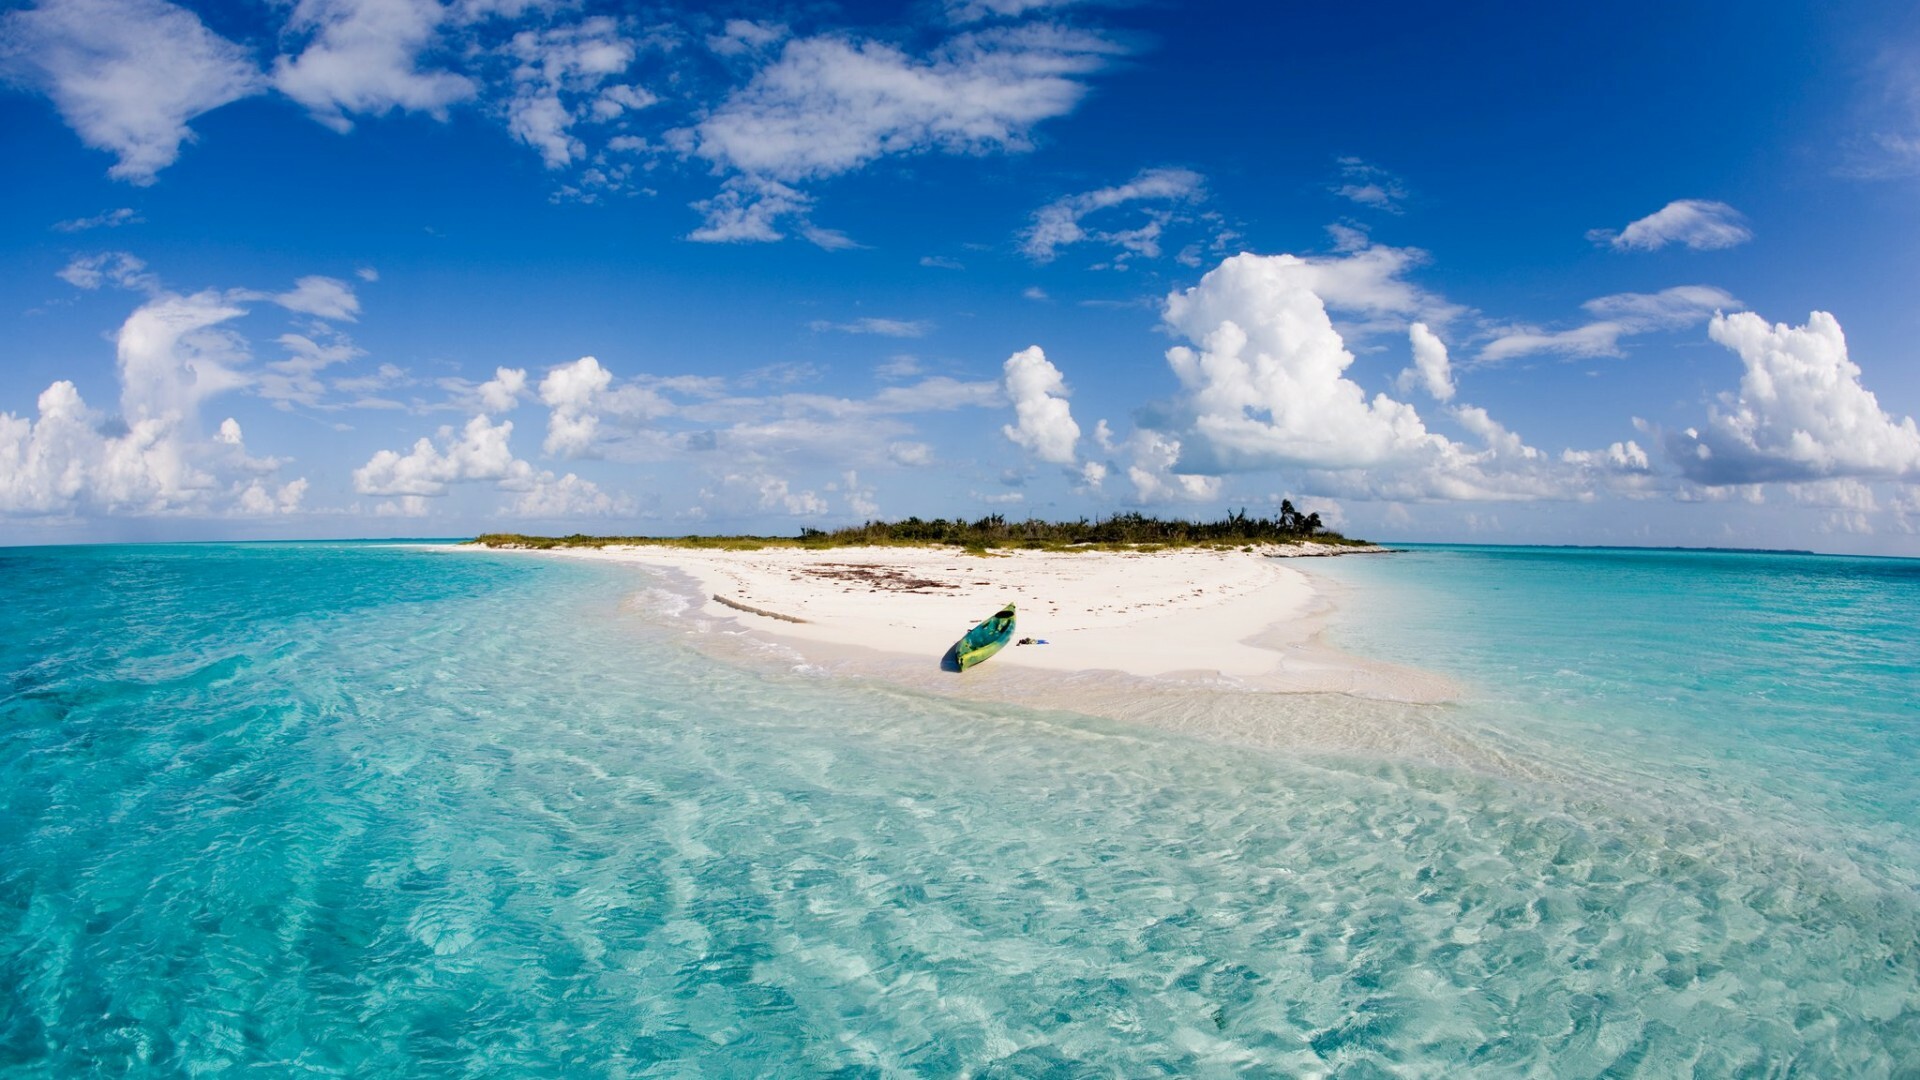 The Bahamas: An archipelago of nearly 700 coral islands, Azure lagoons. 1920x1080 Full HD Background.